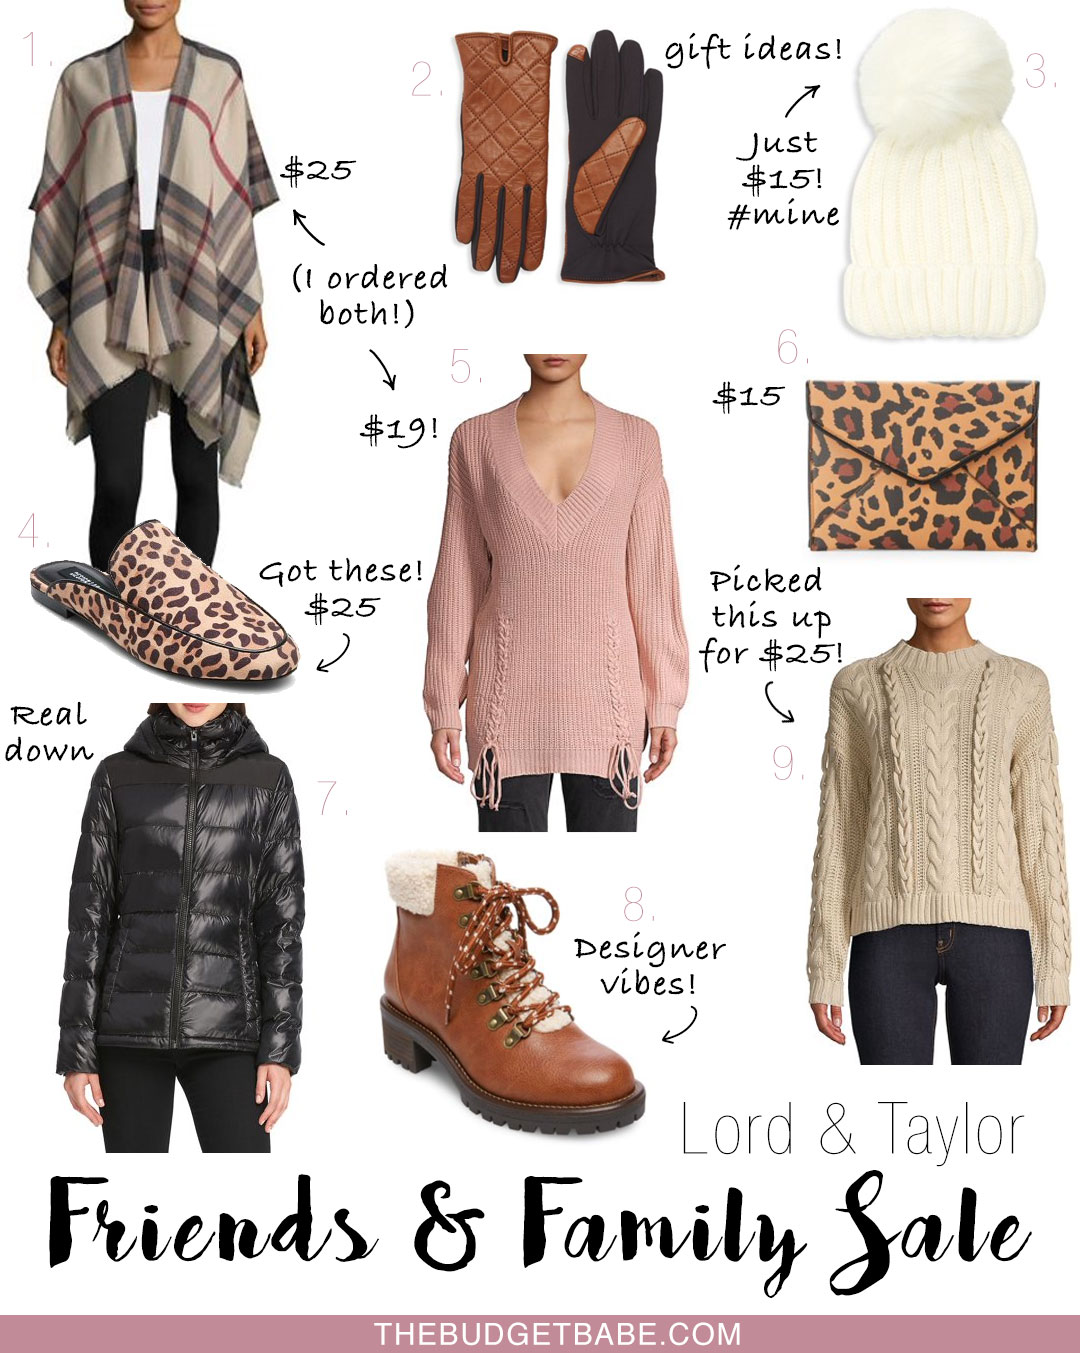 Lord & Taylor Friends and Family Sale - 30% off premium brands!